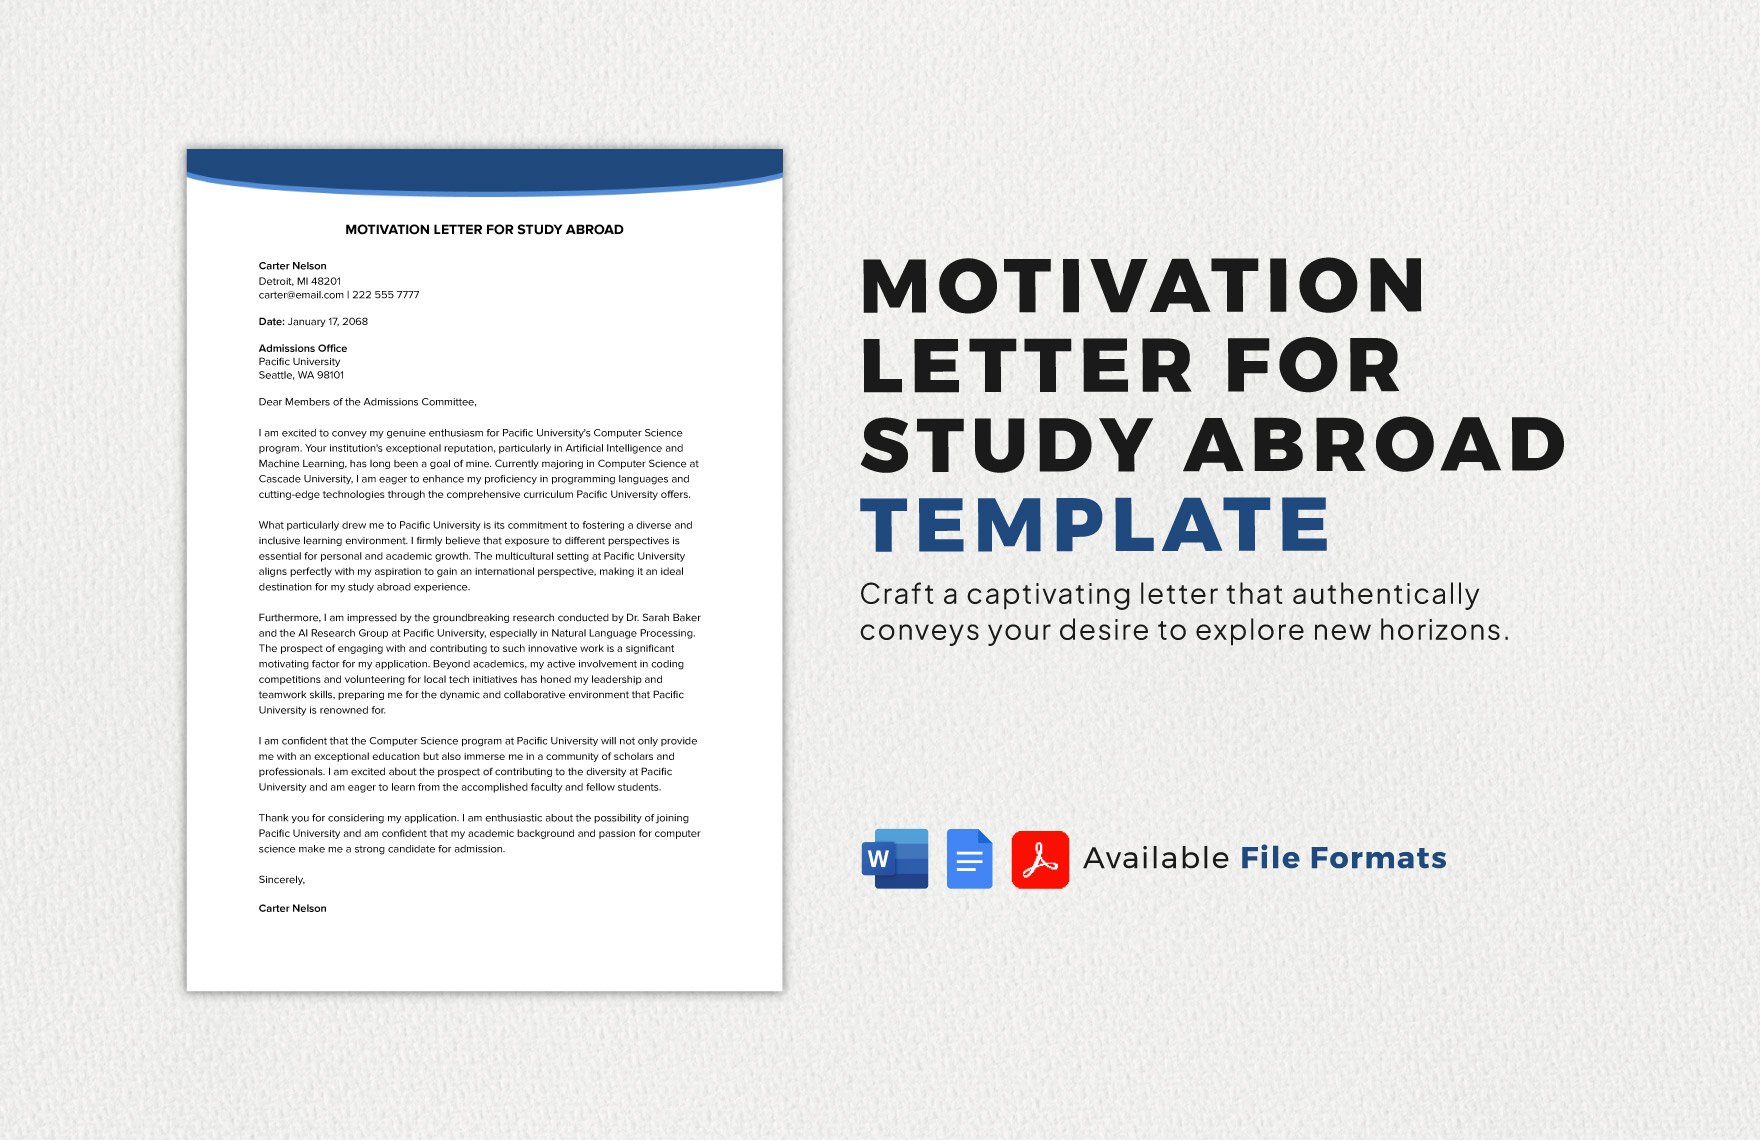 Motivation Letter for Study Abroad Template